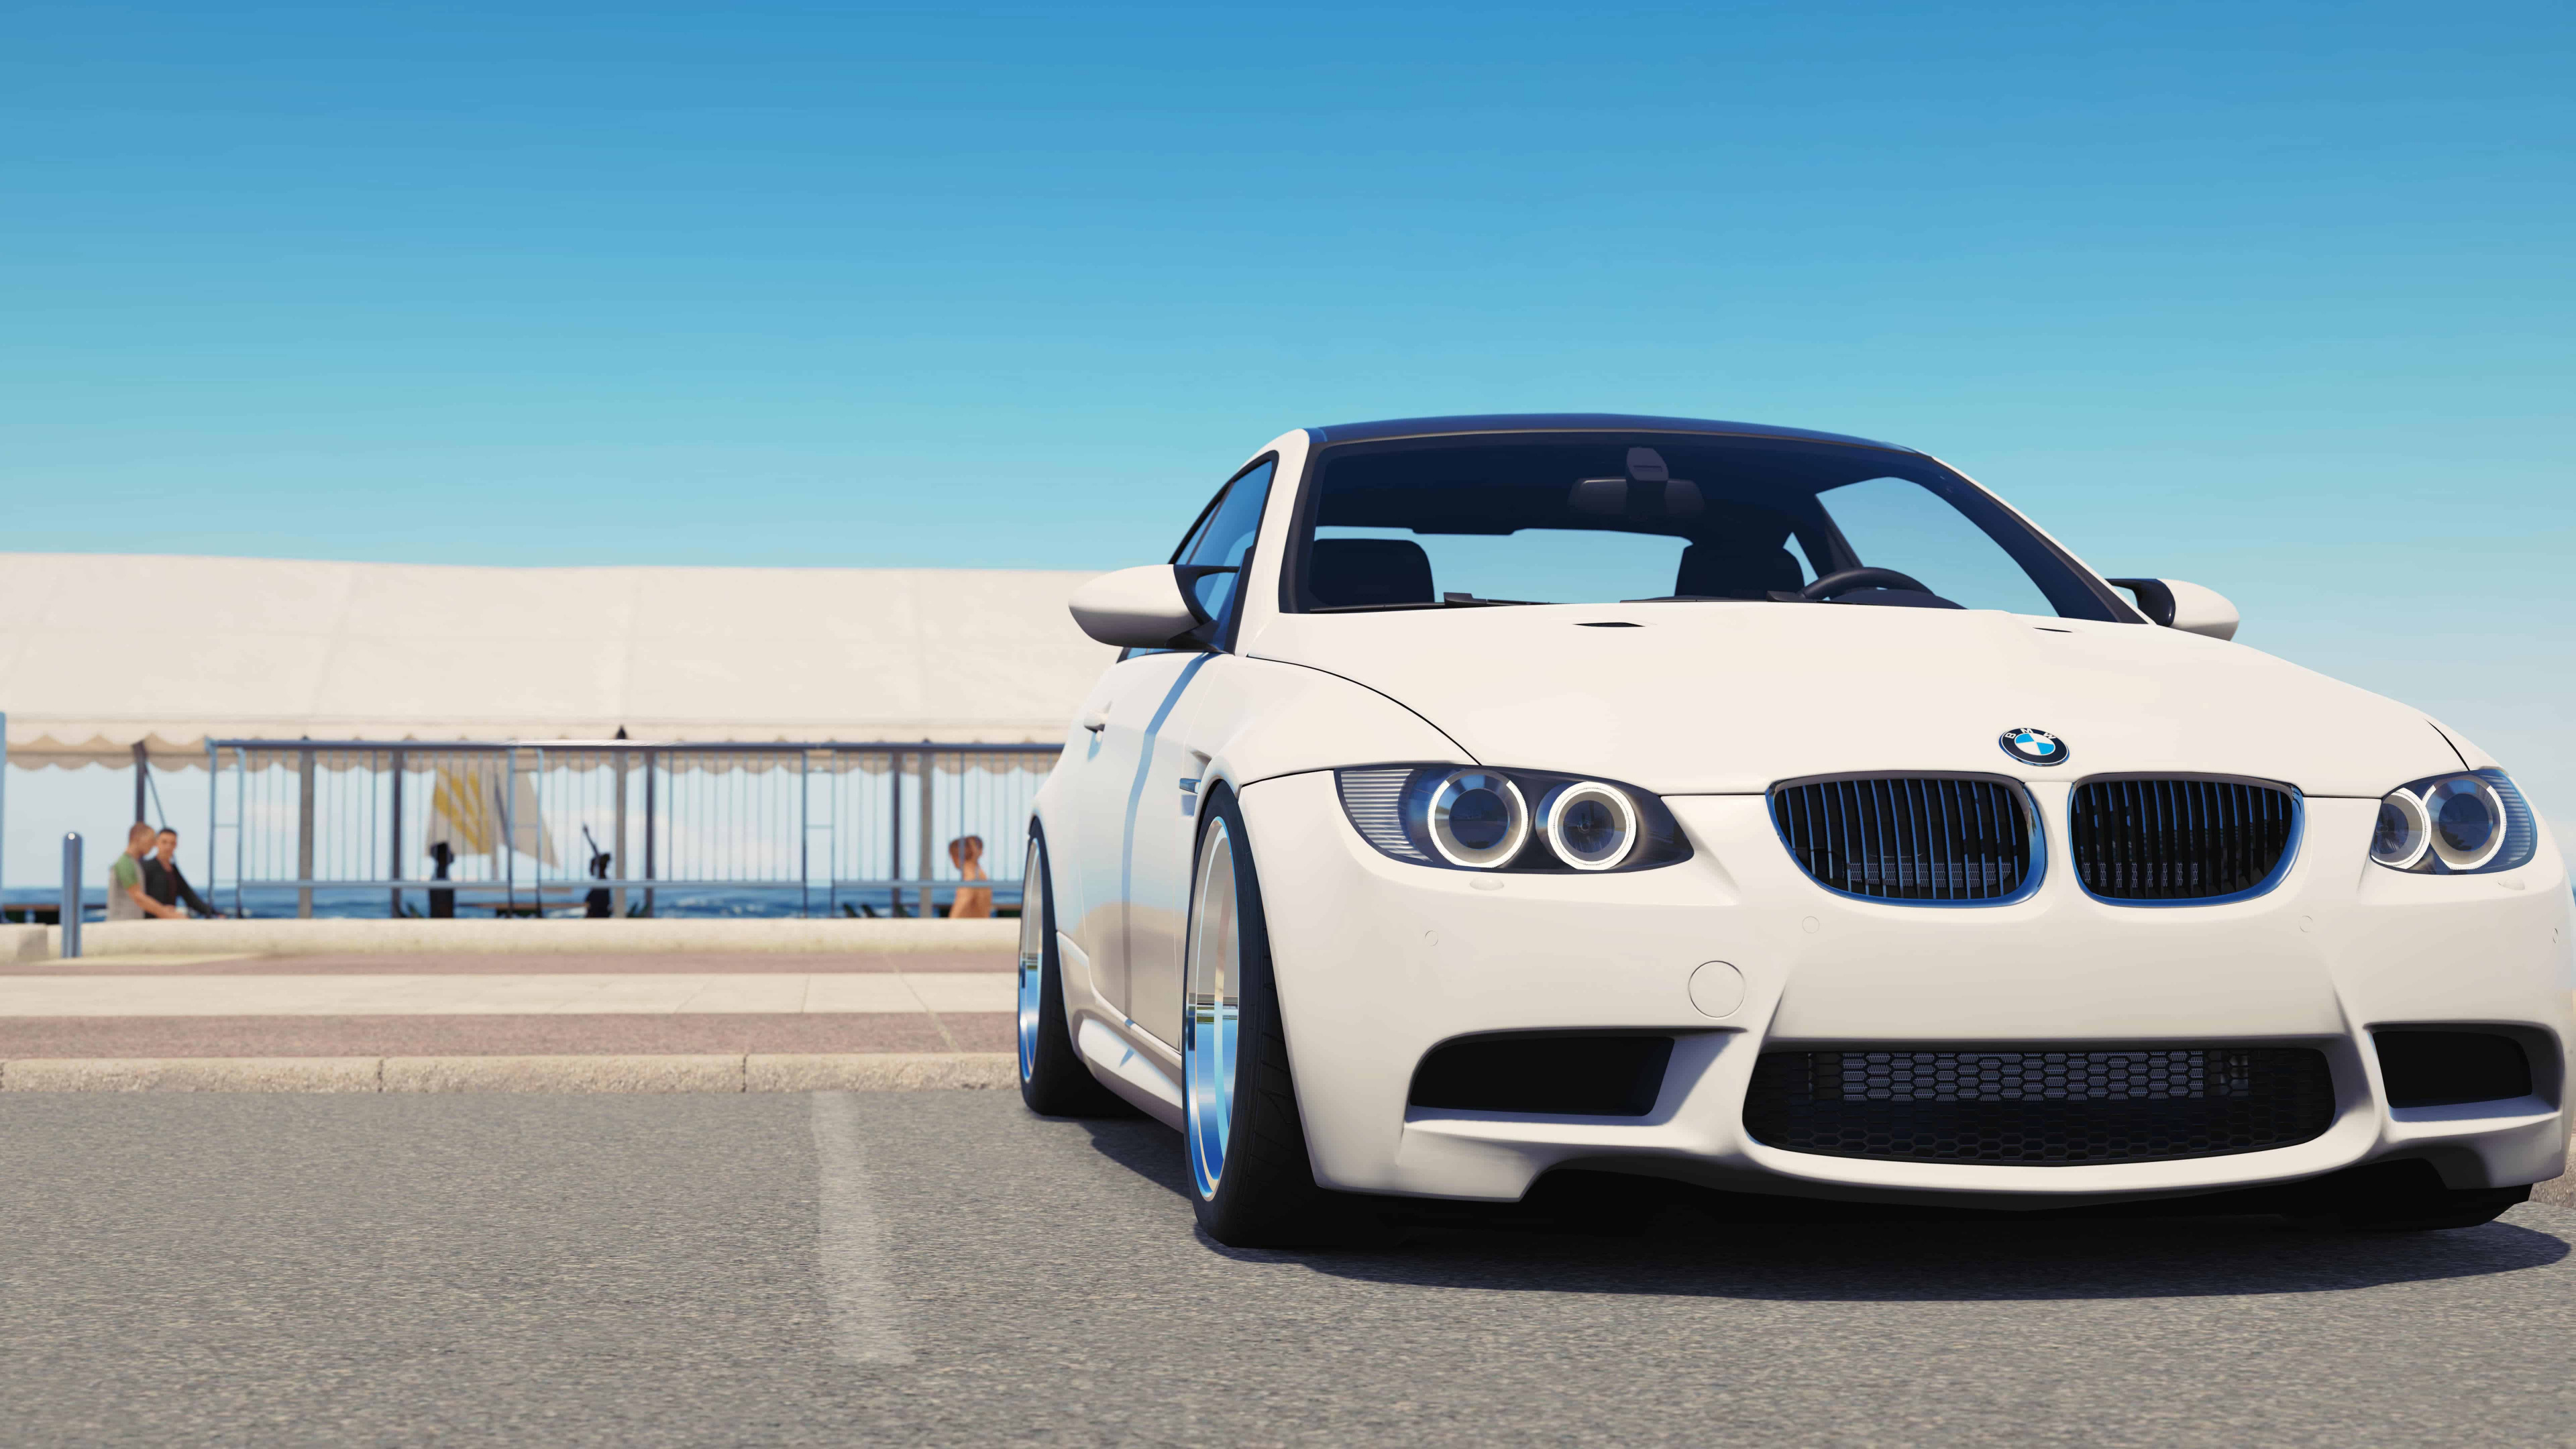 White Bmw m 3 Coupe Parked on Gray Asphalt Road During Daytime. Wallpaper in 3840x2160 Resolution